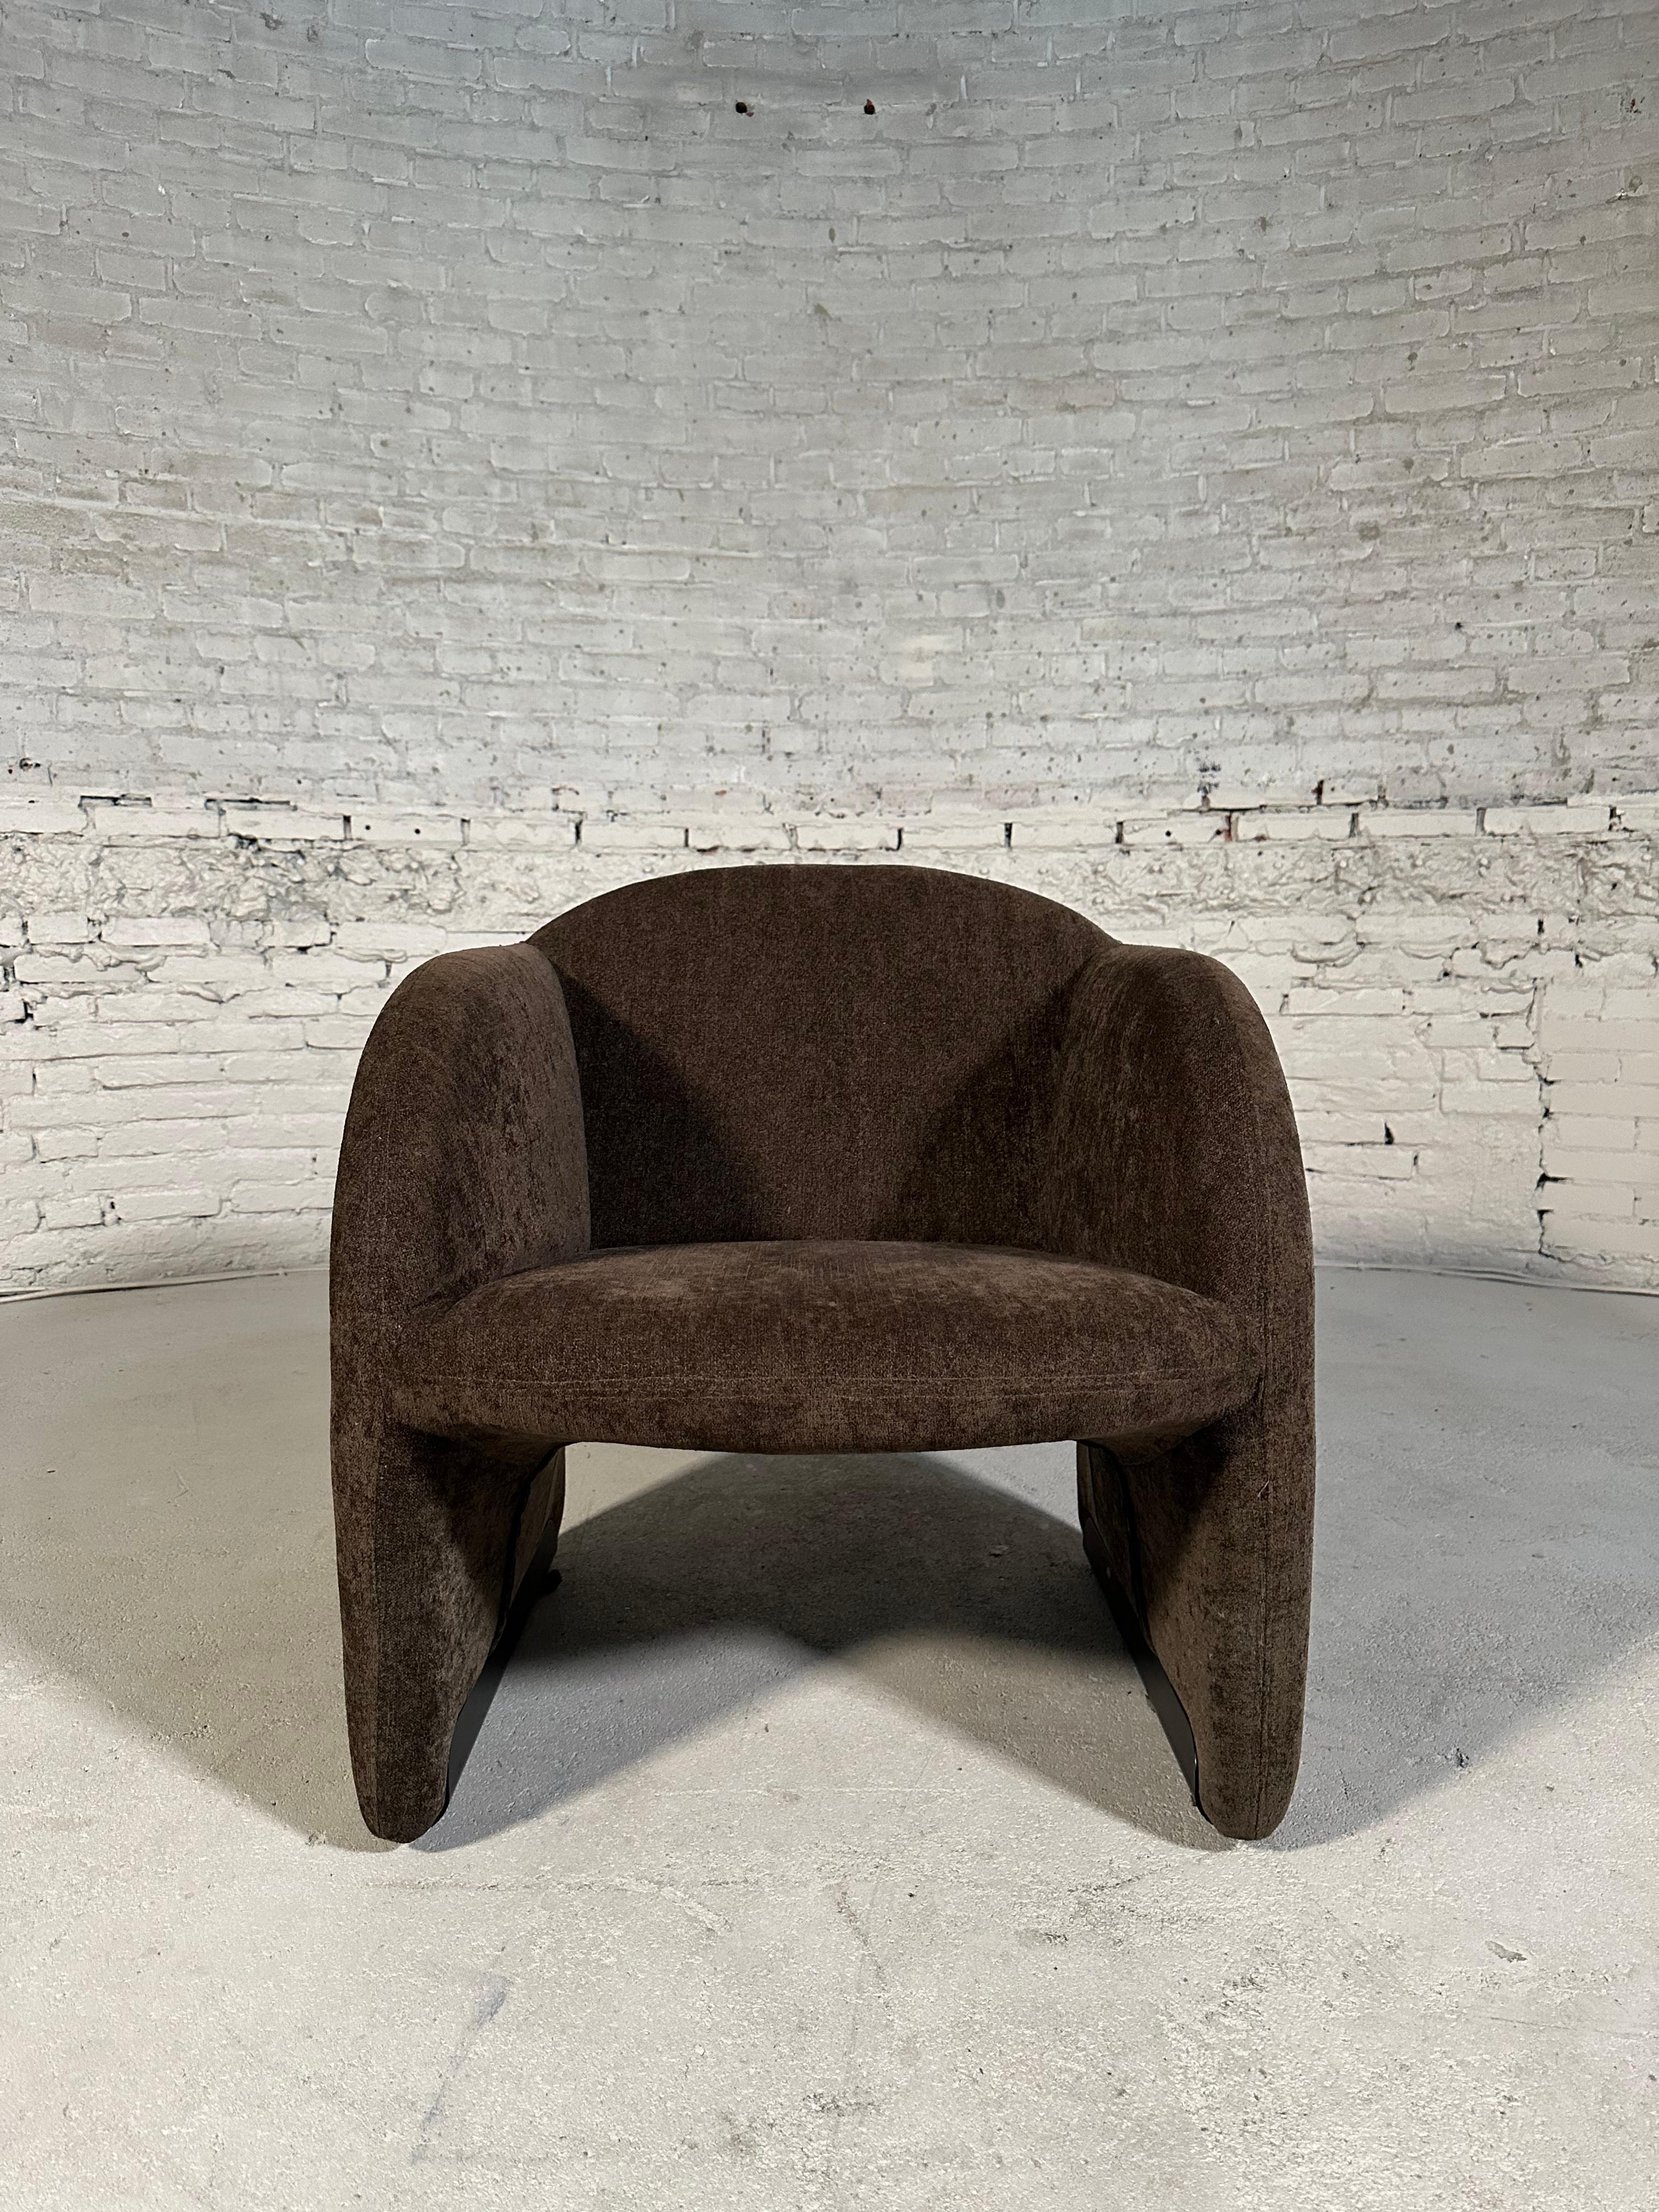 In the late 1960's and early 1970's French designer Pierre Paulin created several sculptural masterpieces for Dutch manufacturer Artifort, including this gorgeous 